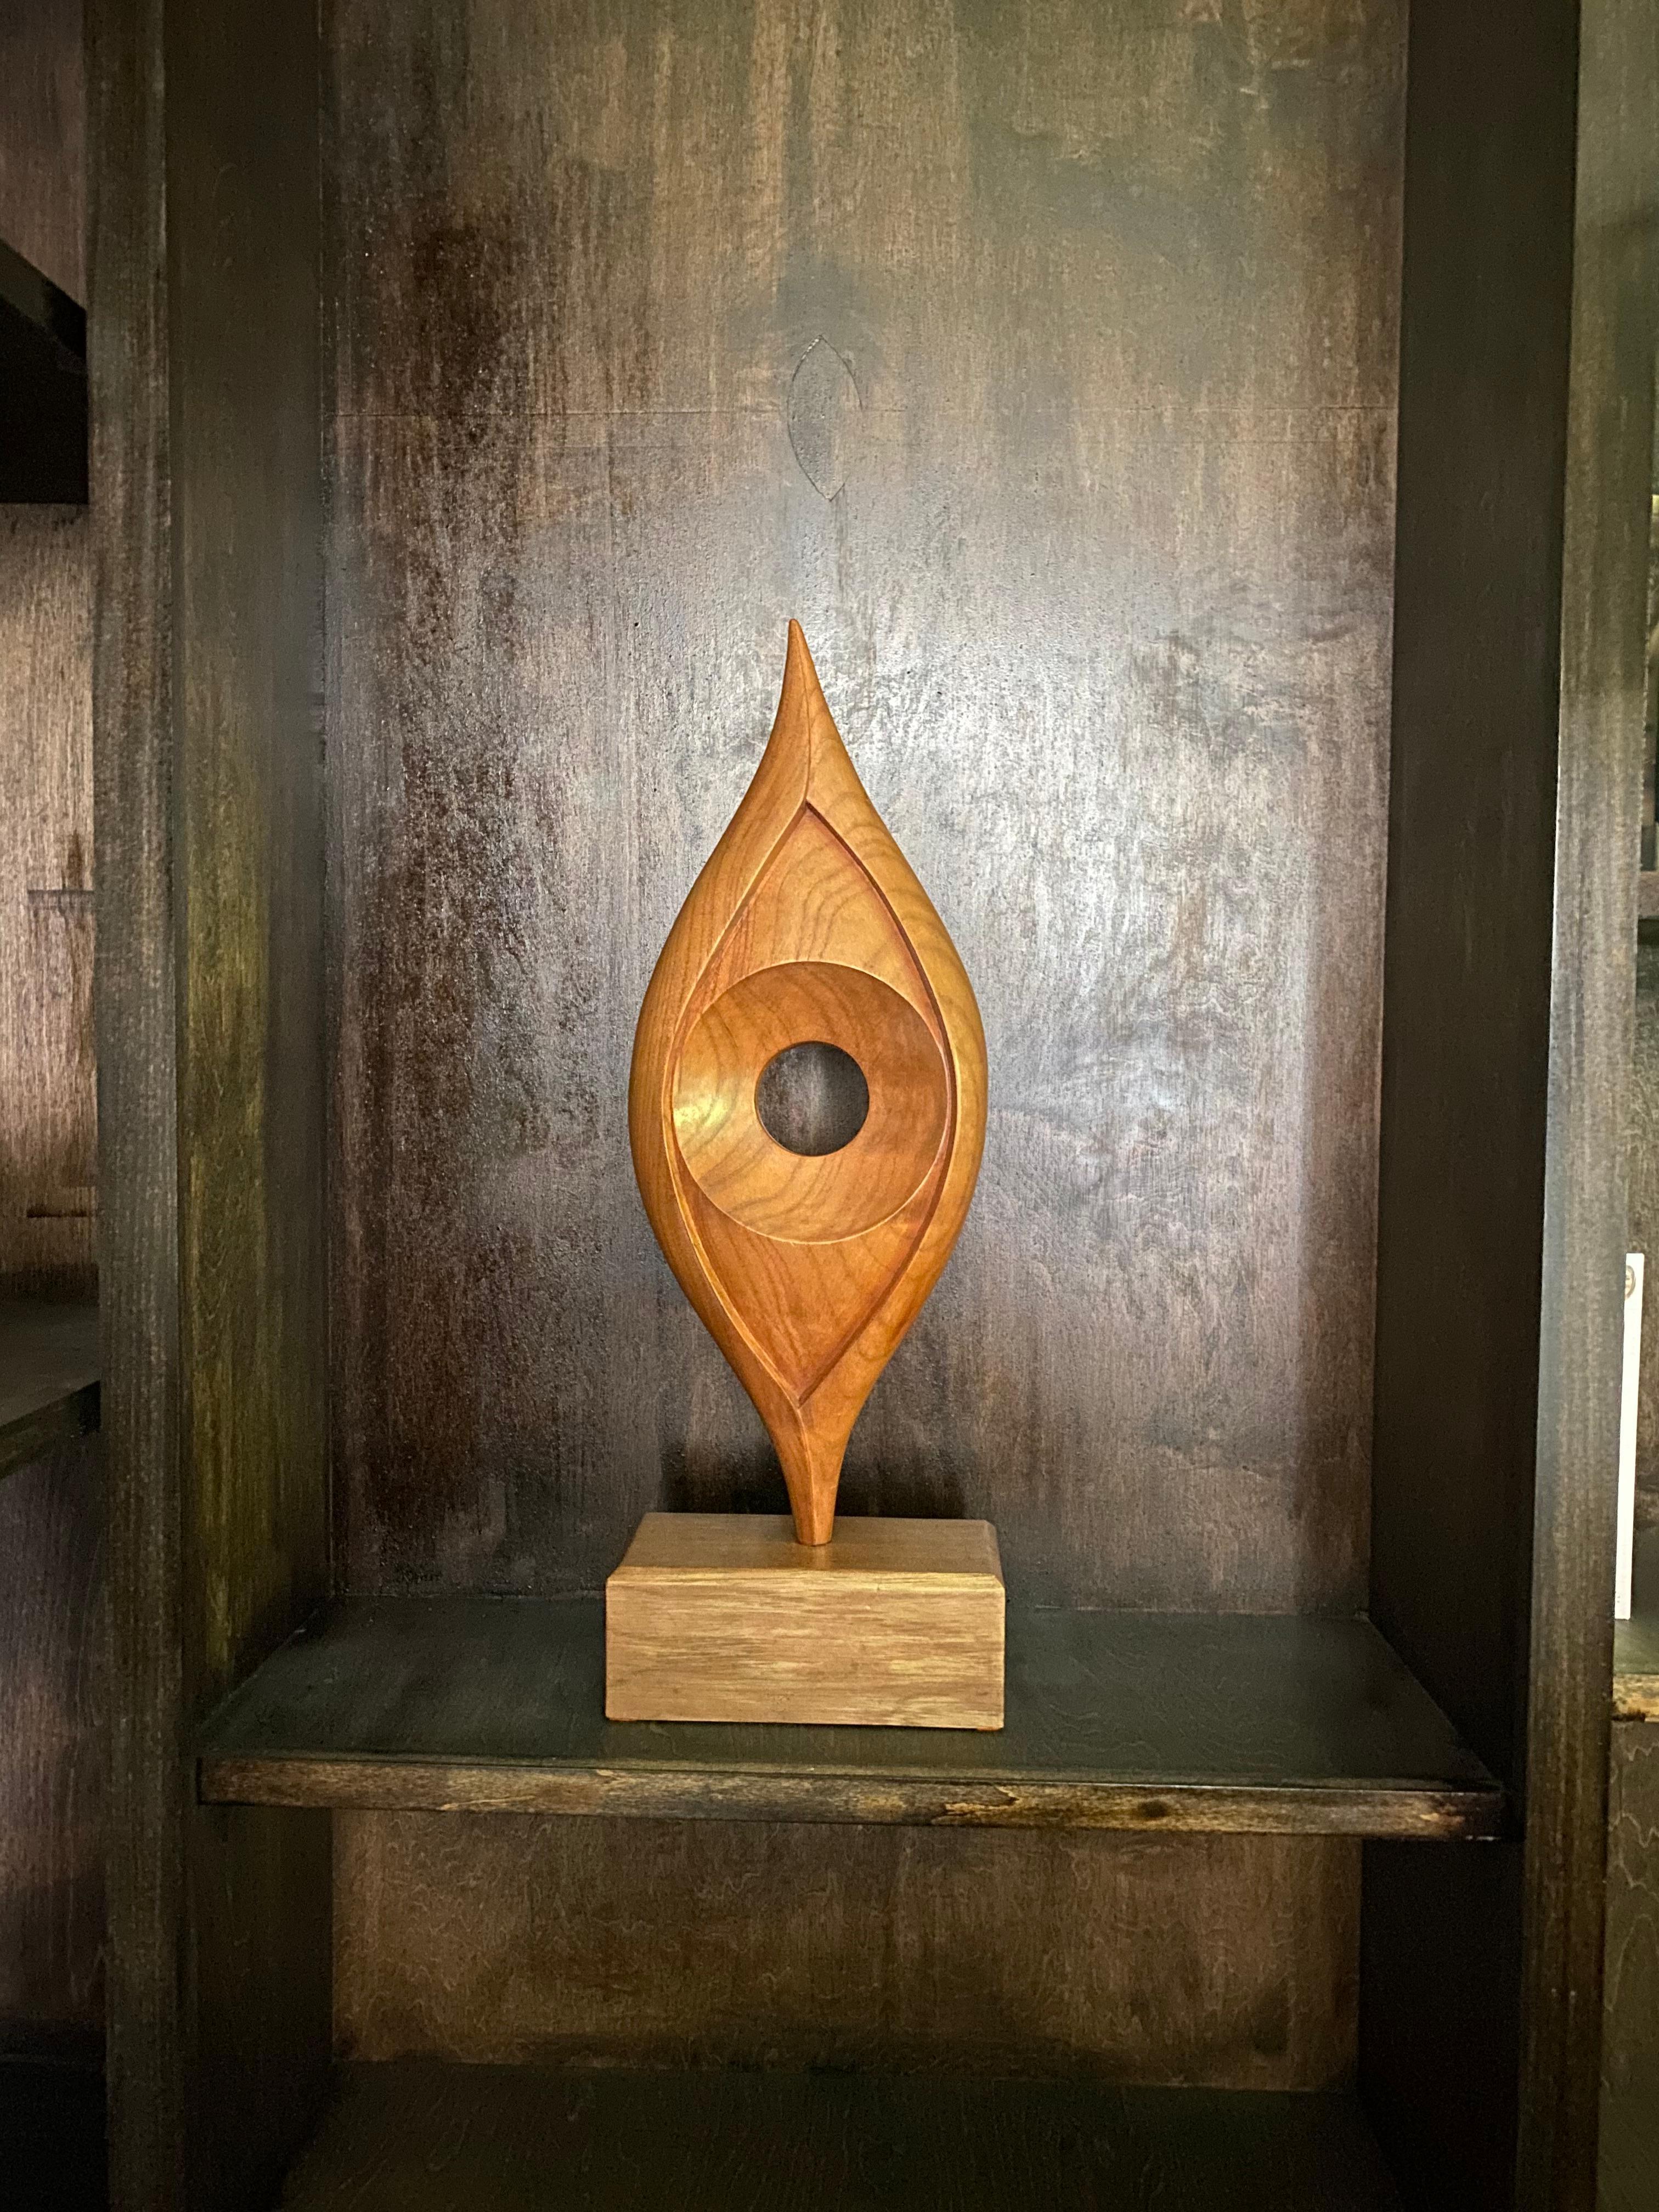 Beautiful Luis Potosi Ecuadorian Modernist Abstract Carved Wood Sculpture made in 1993, see picture. It is in beautiful shape! See pictures for details and signature.

Luis Potosi was born in San Antonio de Ibarra, Imbabura, Ecuador. After he